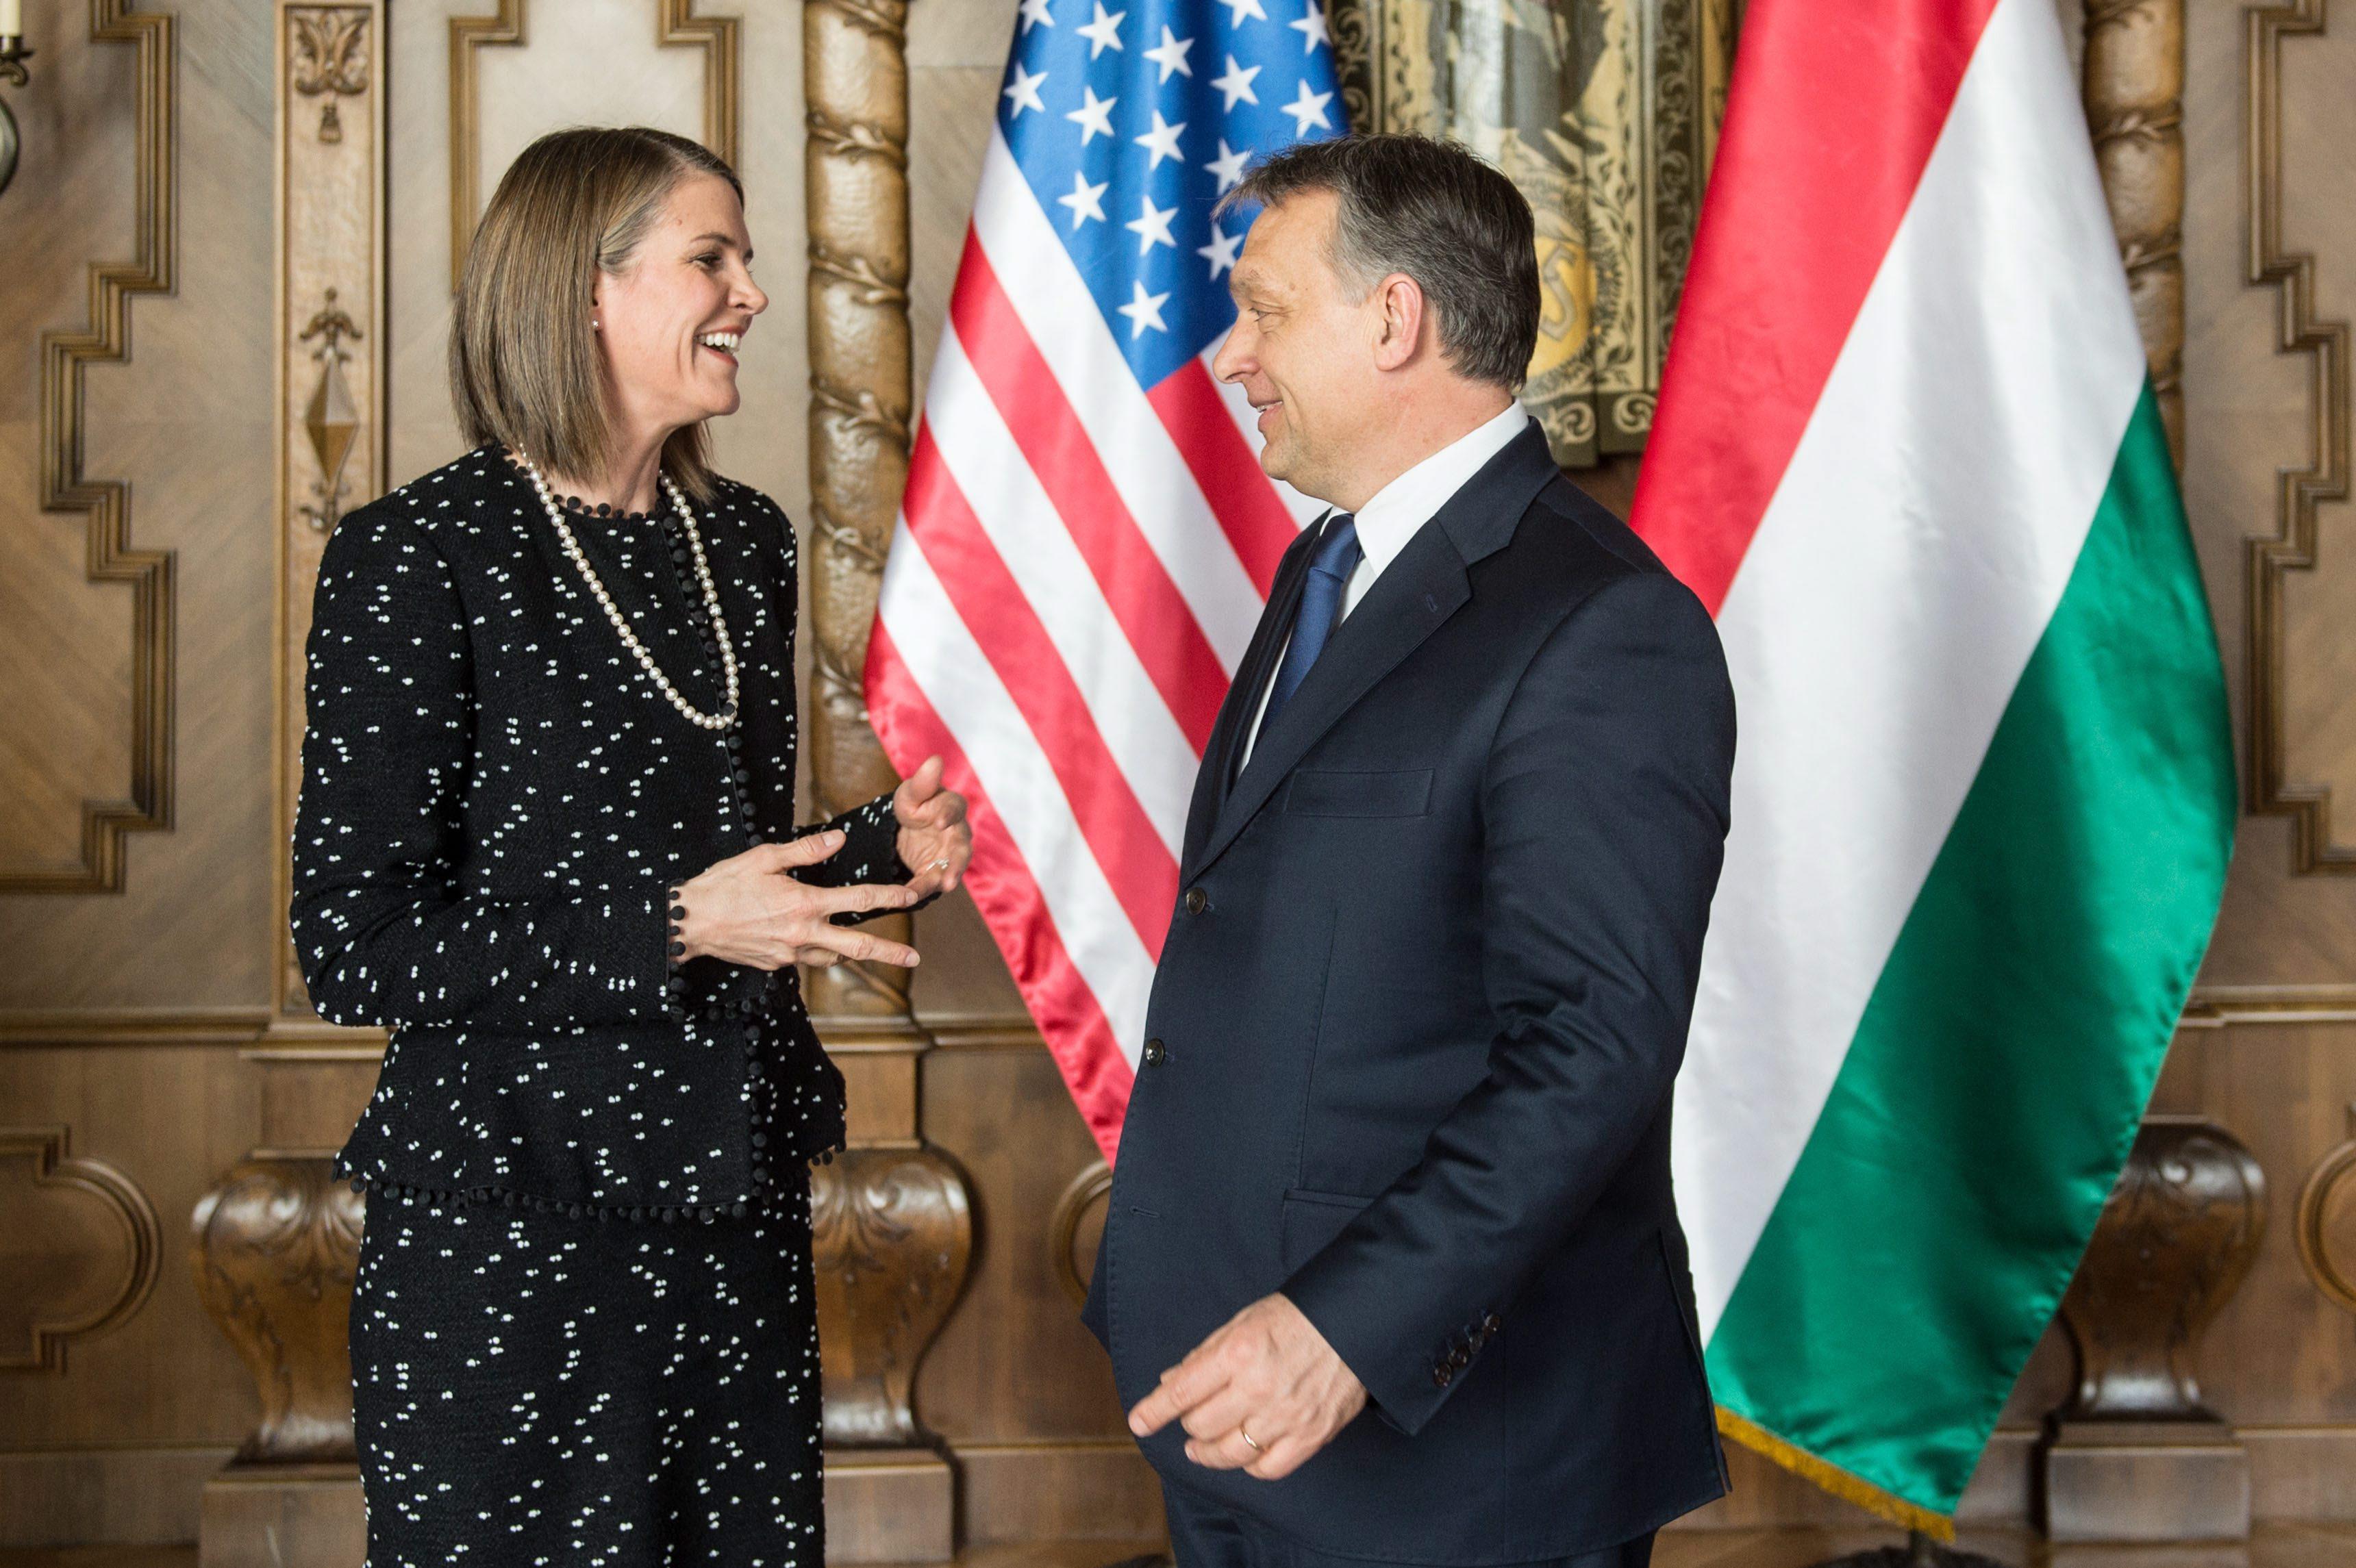 Rapport Between Hungary & United States Improves